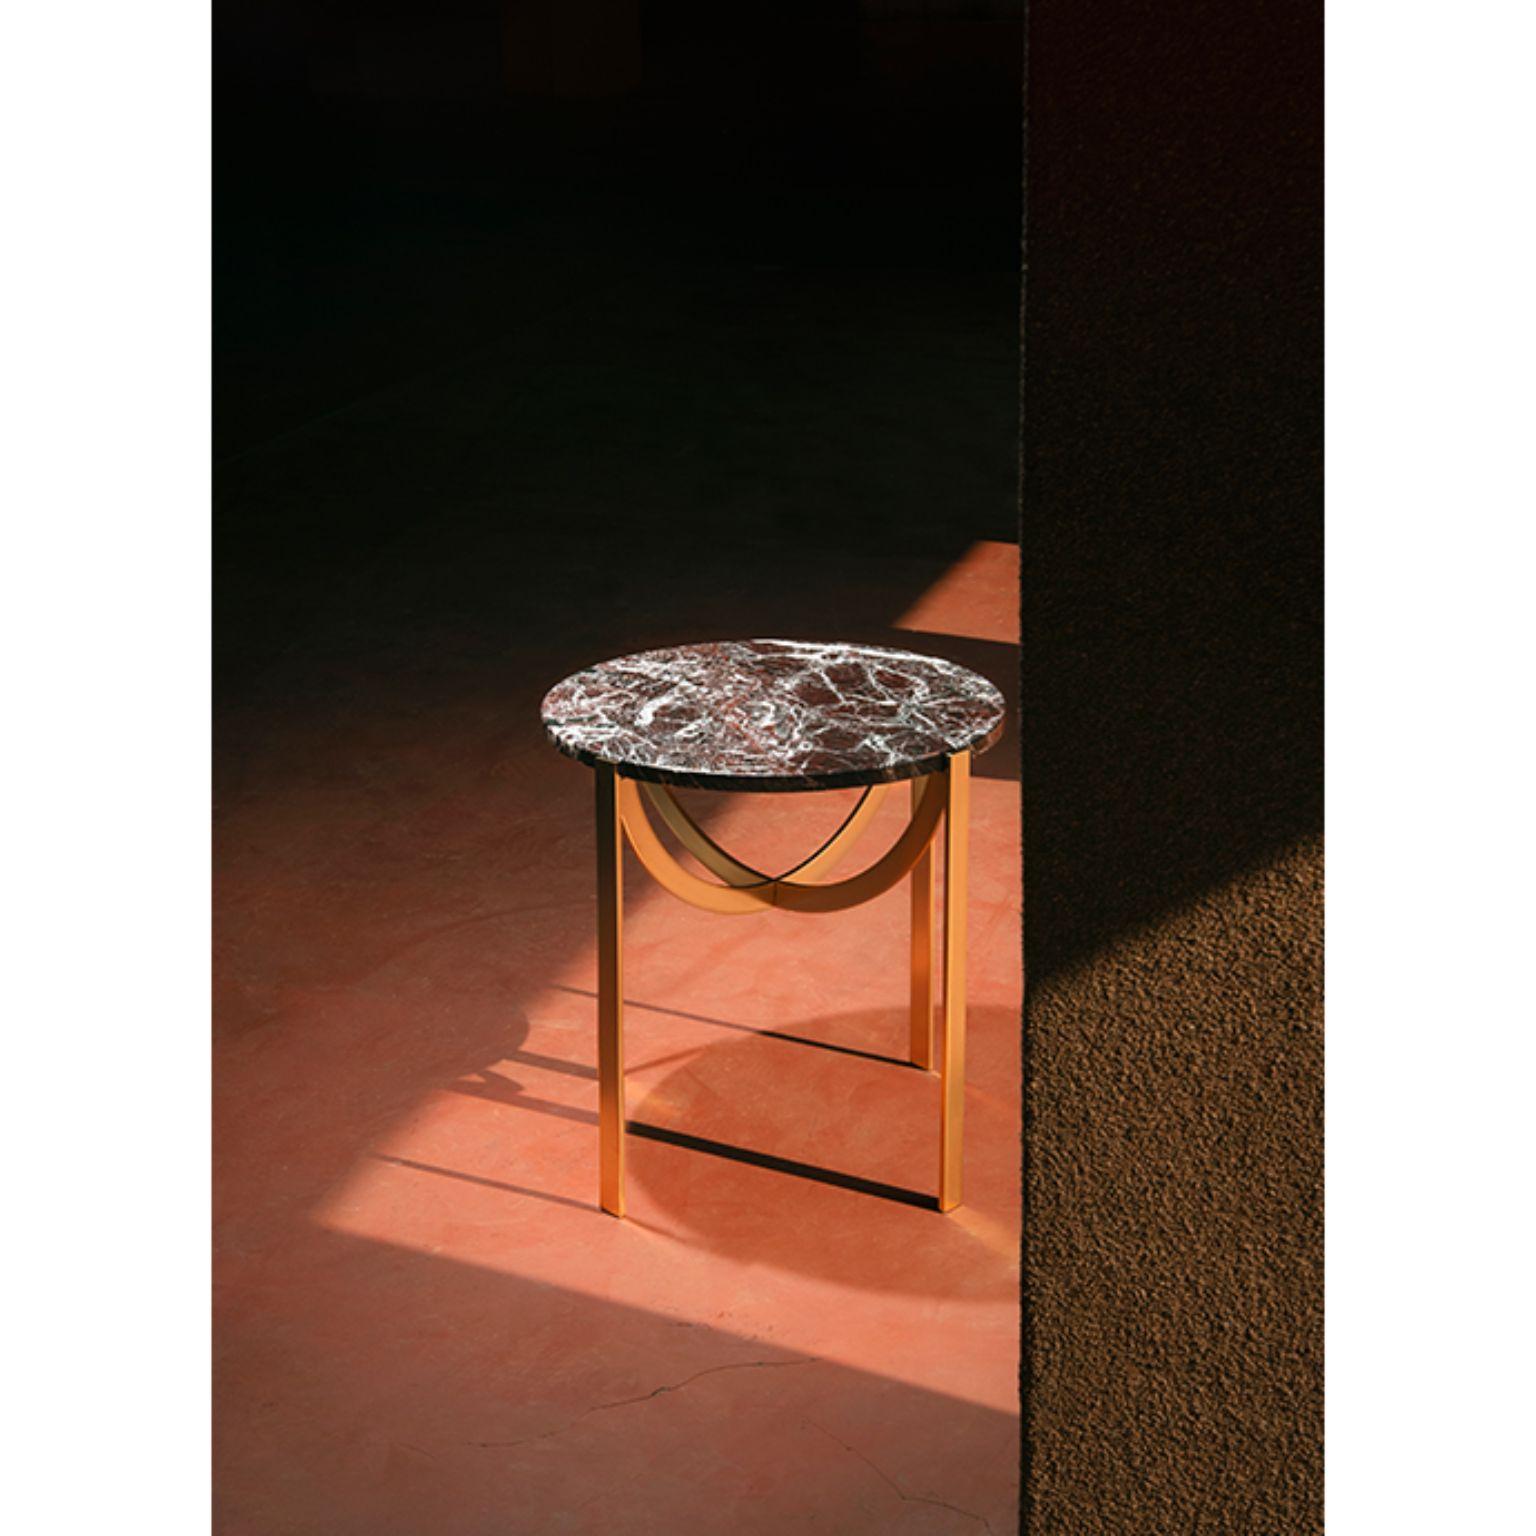 Astra coffee table by Patrick Norguet
Materials: Marble, metal structure
Dimensions: Ø51.4 x H 49.8 cm

The Astra family of coffee tables surprises by its sophisticated simplicity.
It was named as a tribute to those old instruments, which